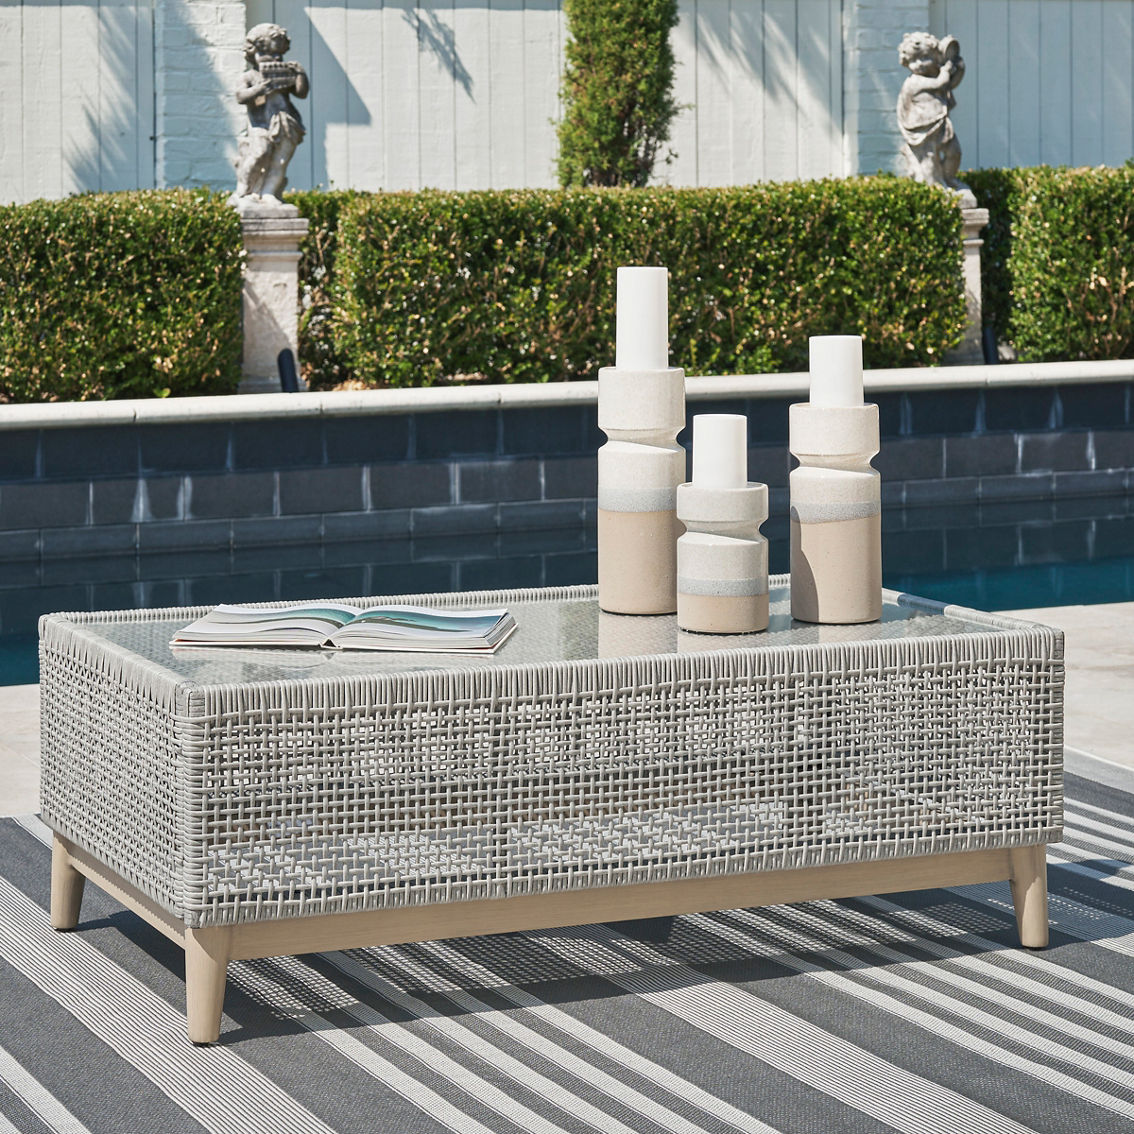 Signature Design by Ashley Seton Creek Outdoor Coffee Table - Image 4 of 6